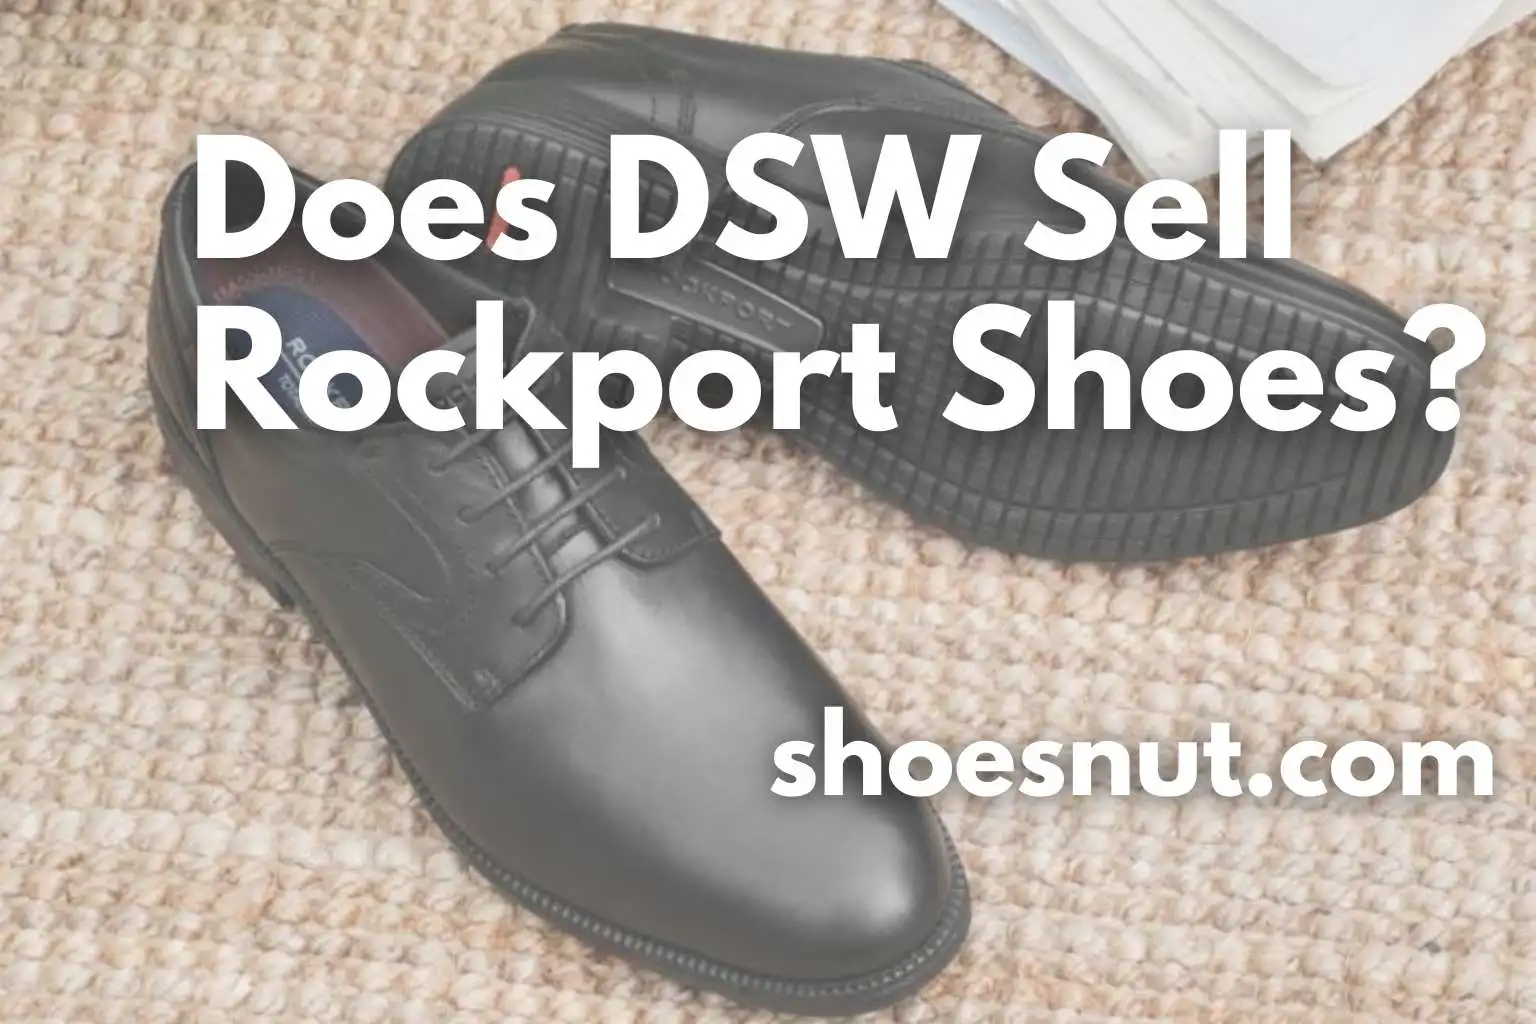 Does DSW Sell Rockport Shoes?